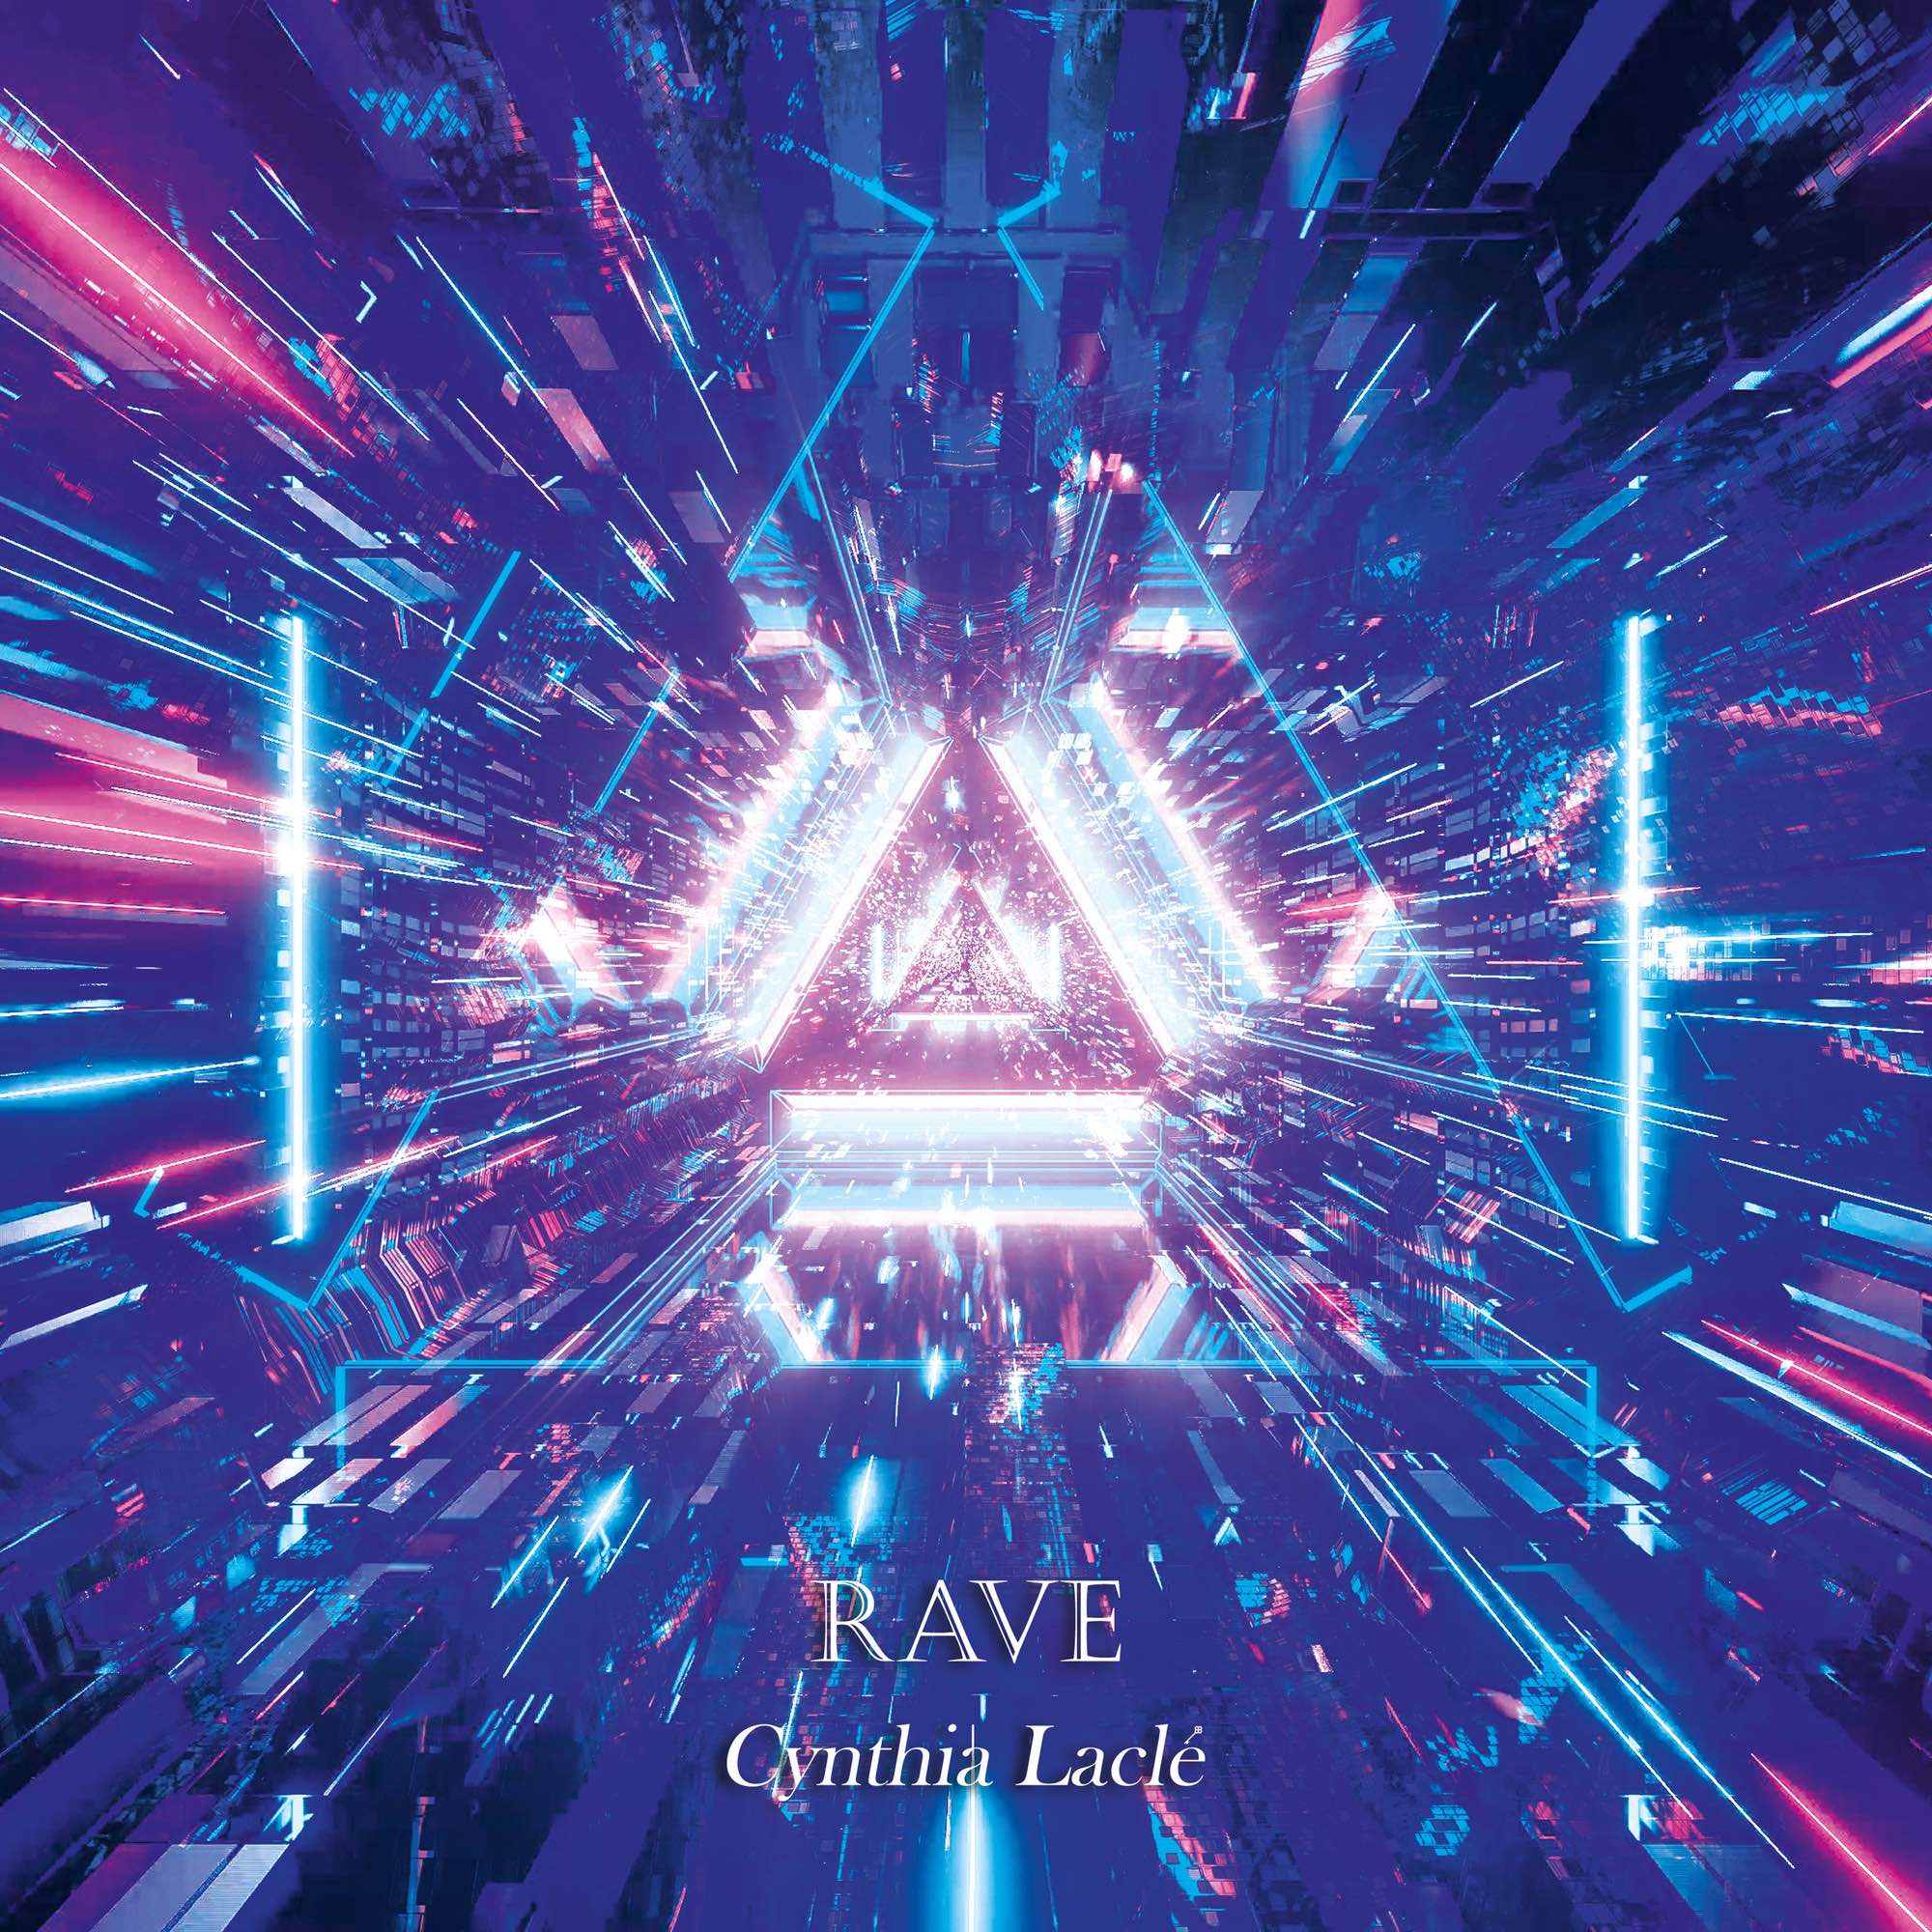 Invigorate Your Playlist with Cynthia Lacle's ‘Rave’: a Stellar New Hard Techno Production